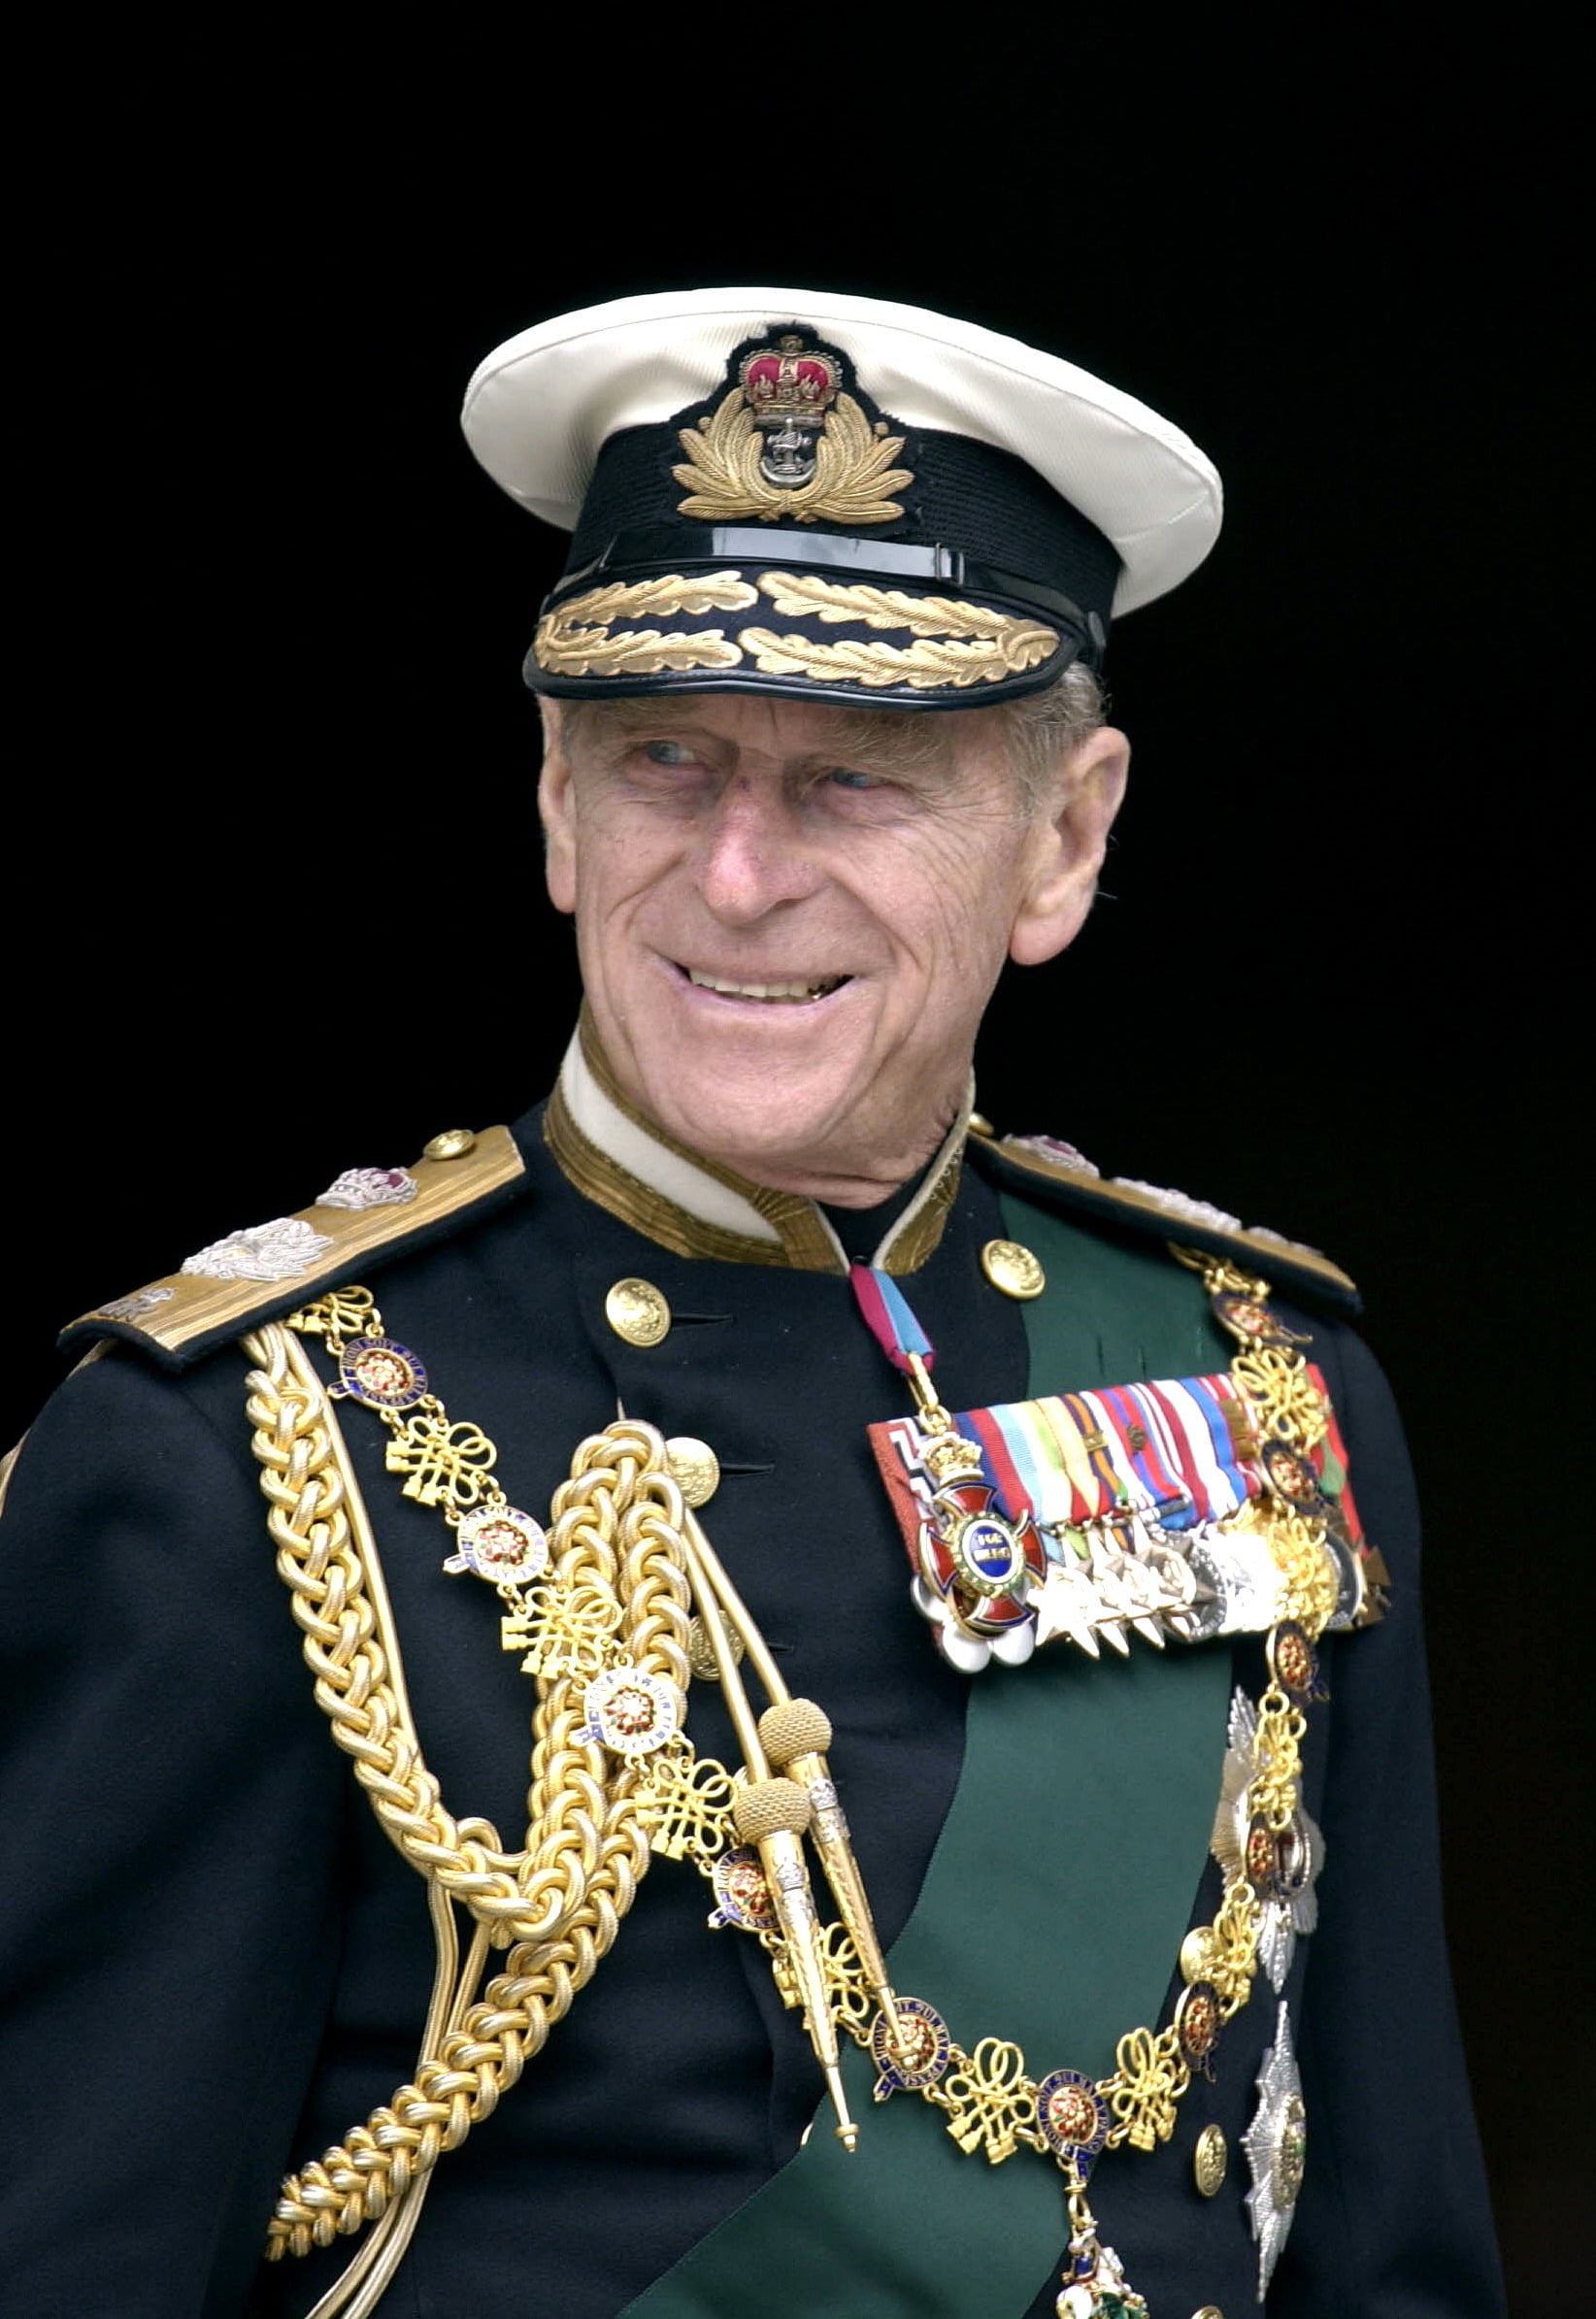 LONDON, UNITED KINGDOM - JUNE 04:  Prince Philip In Naval Uniform With Medals At St. Paul's Cathedral On The Day Of The Service To Mark The Golden Jubilee - The 50th Anniversary Of The Monarch's Reign.  (Photo by Tim Graham Photo Library via Getty Images)